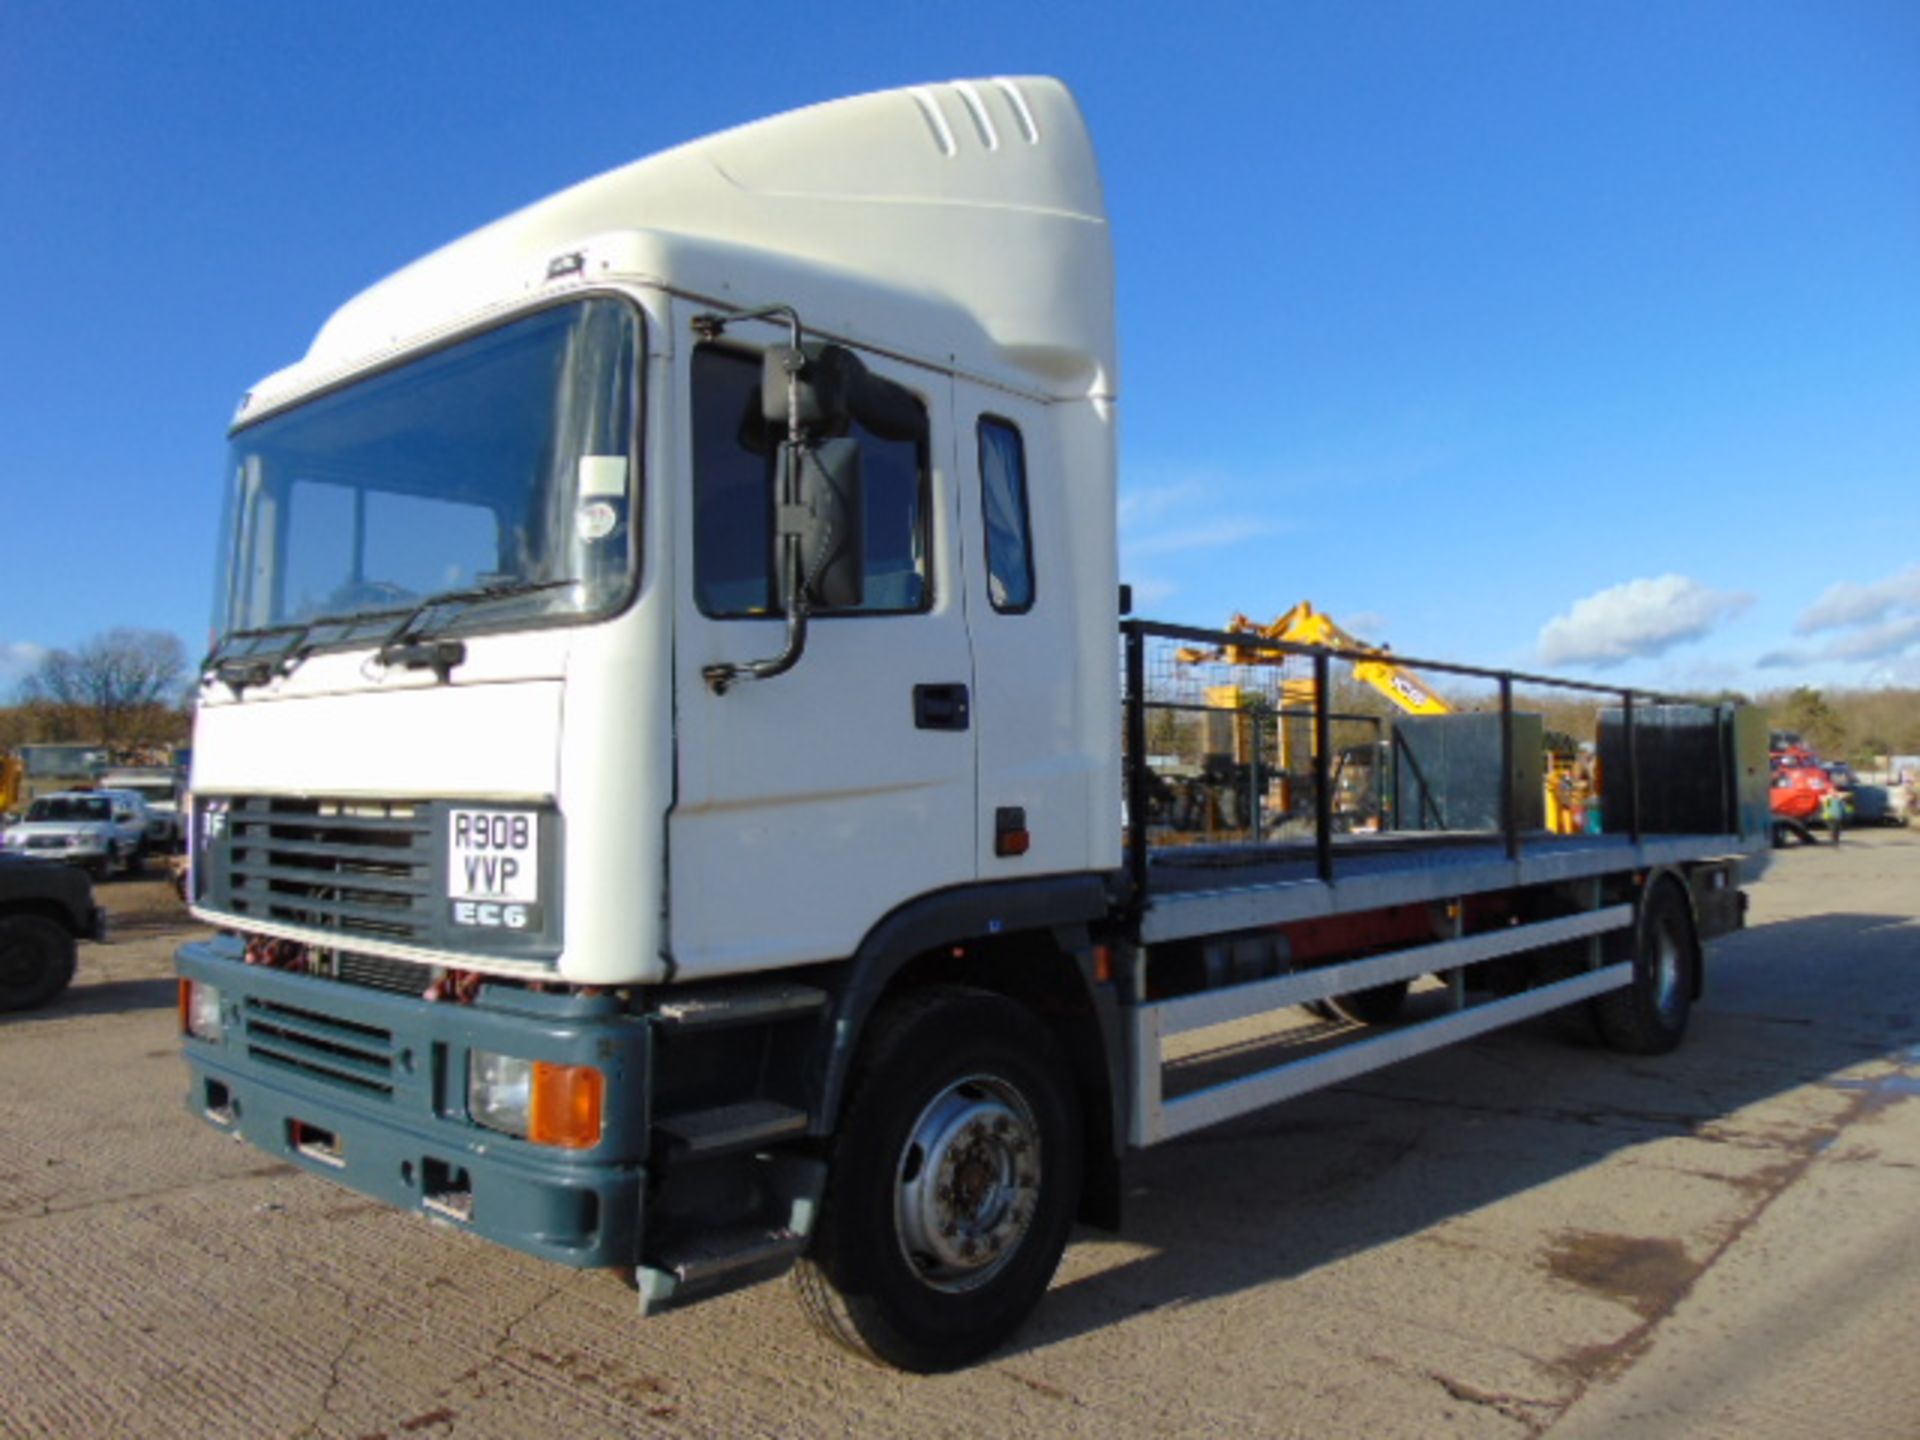 1998 ERF EC6.23 RD2 4x2 Flatbed Truck - Image 3 of 22